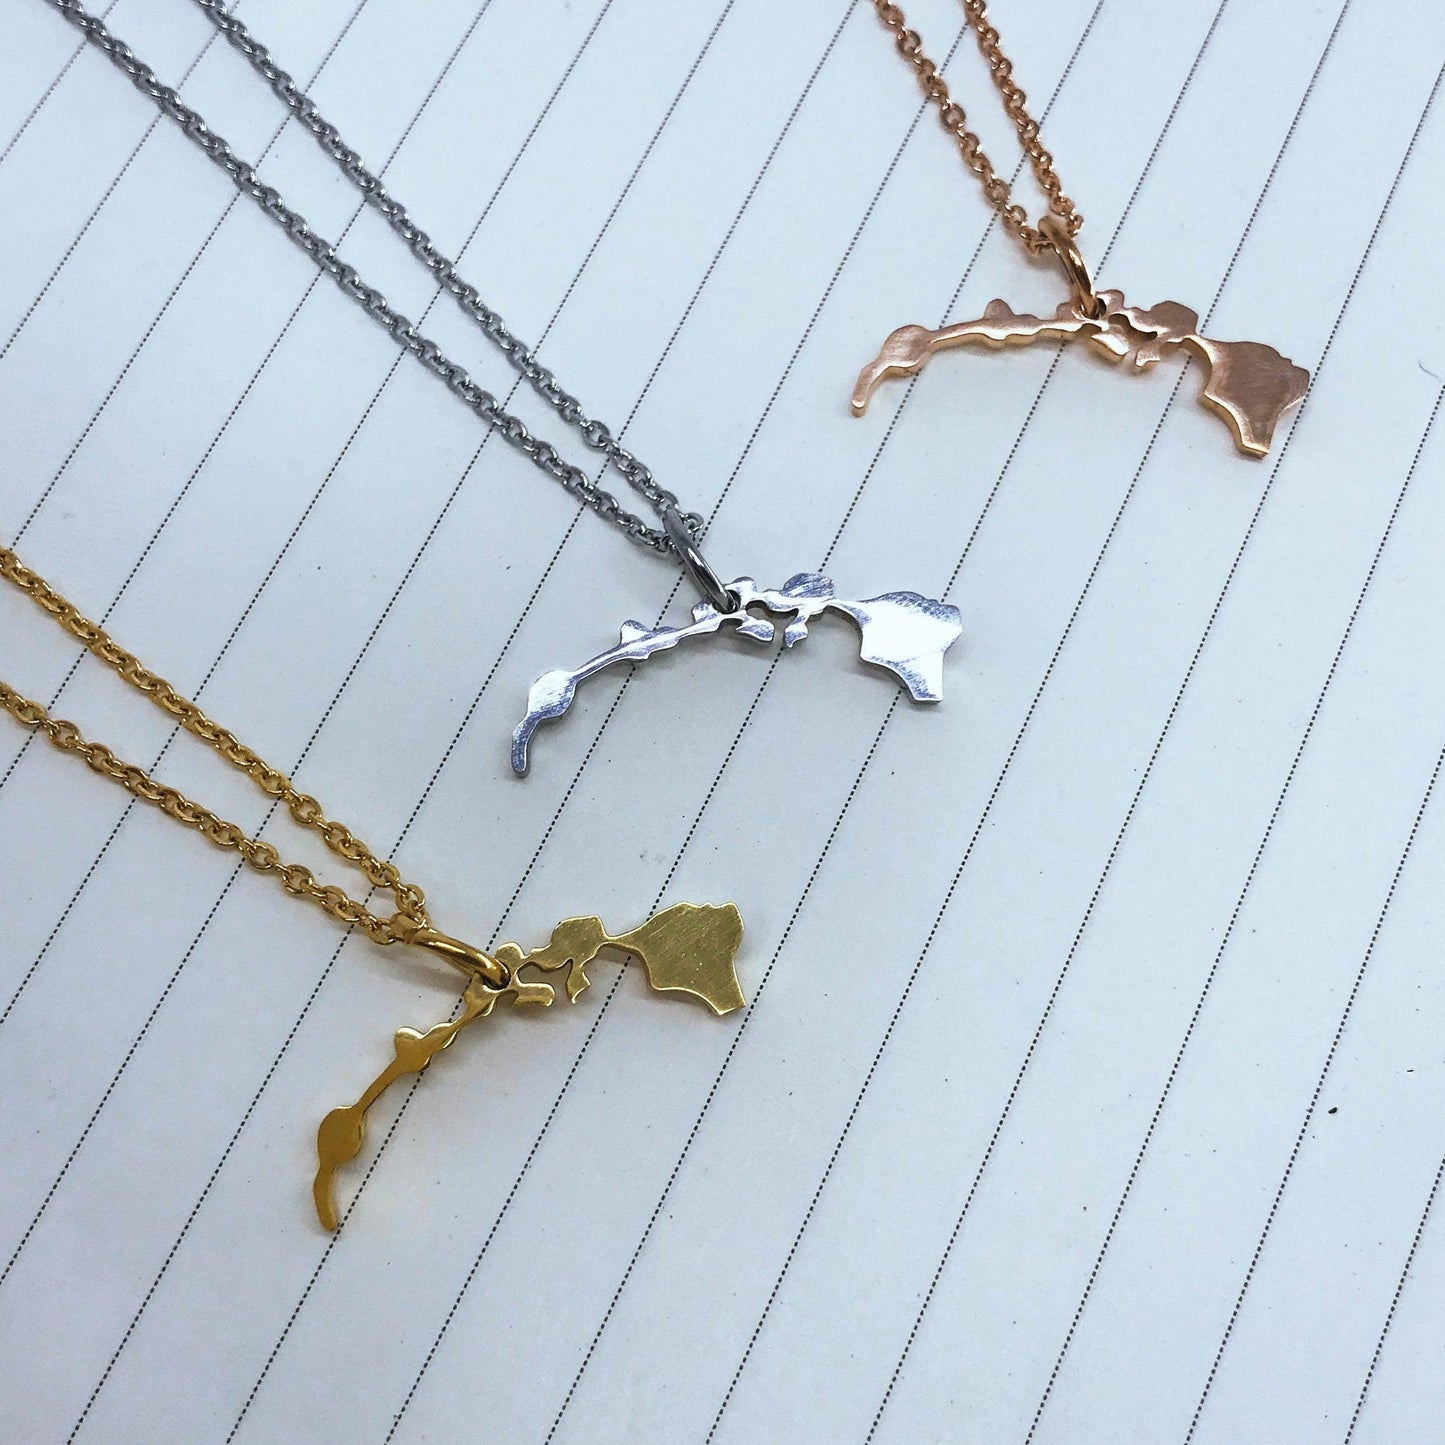 Hawaii State Silhouette Necklaces in 3 different colors: Gold, Silver & Rose Gold